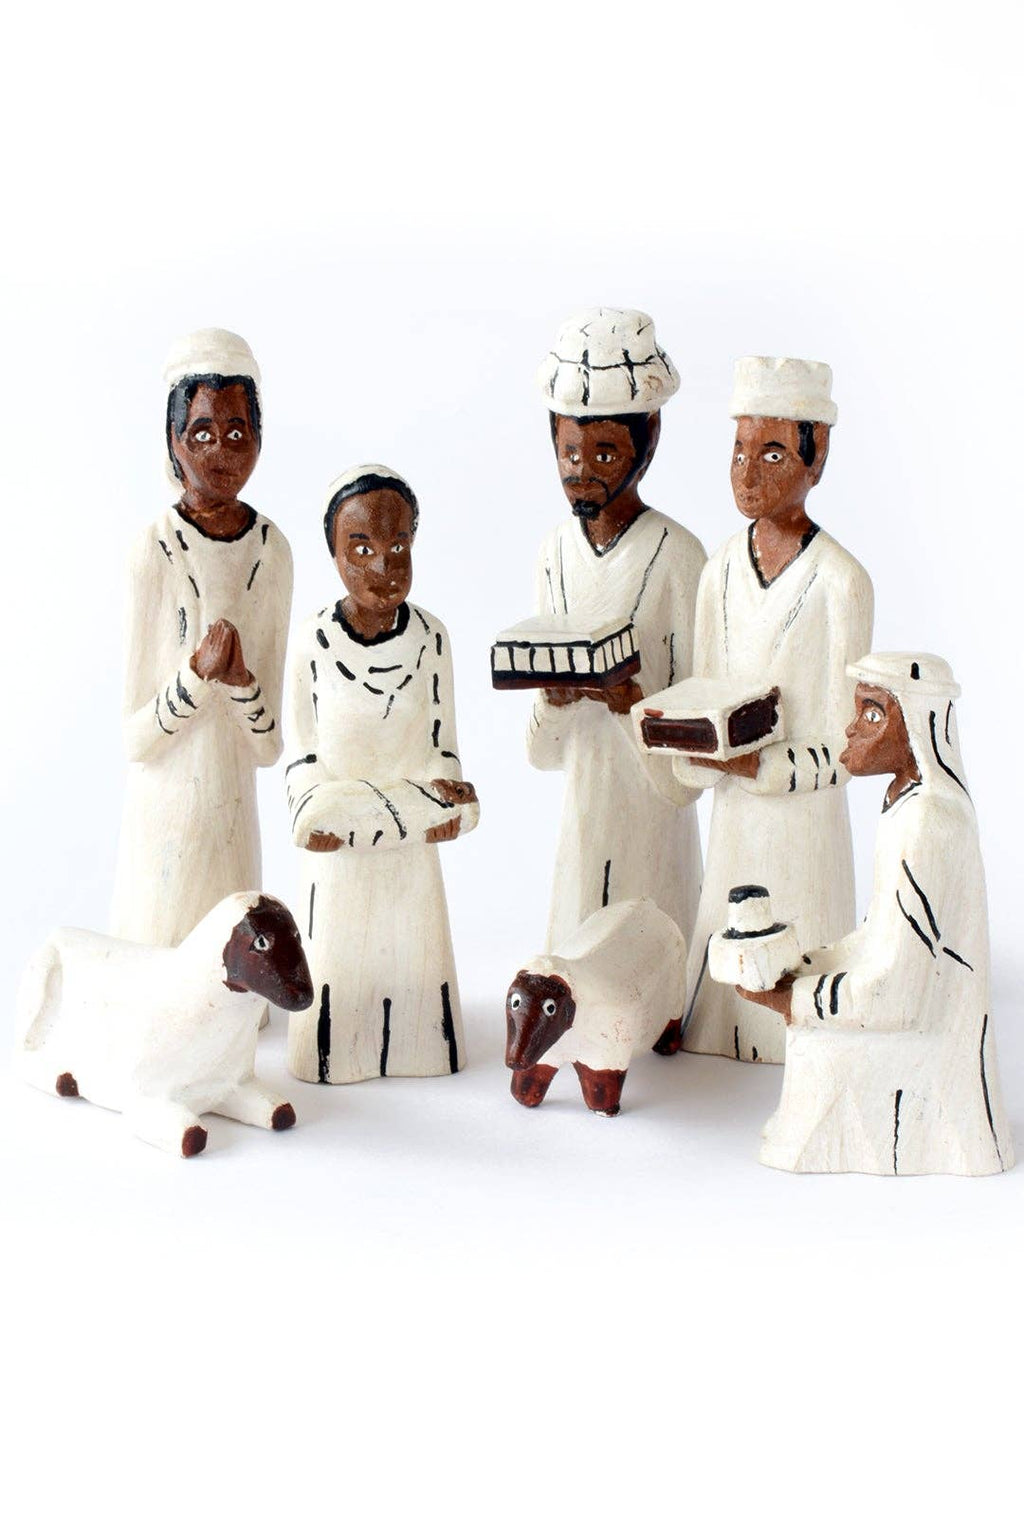 Nativity Scene from Mozambique - Hand Carved & Hand Painted Wood, Housewarming Gift for Her